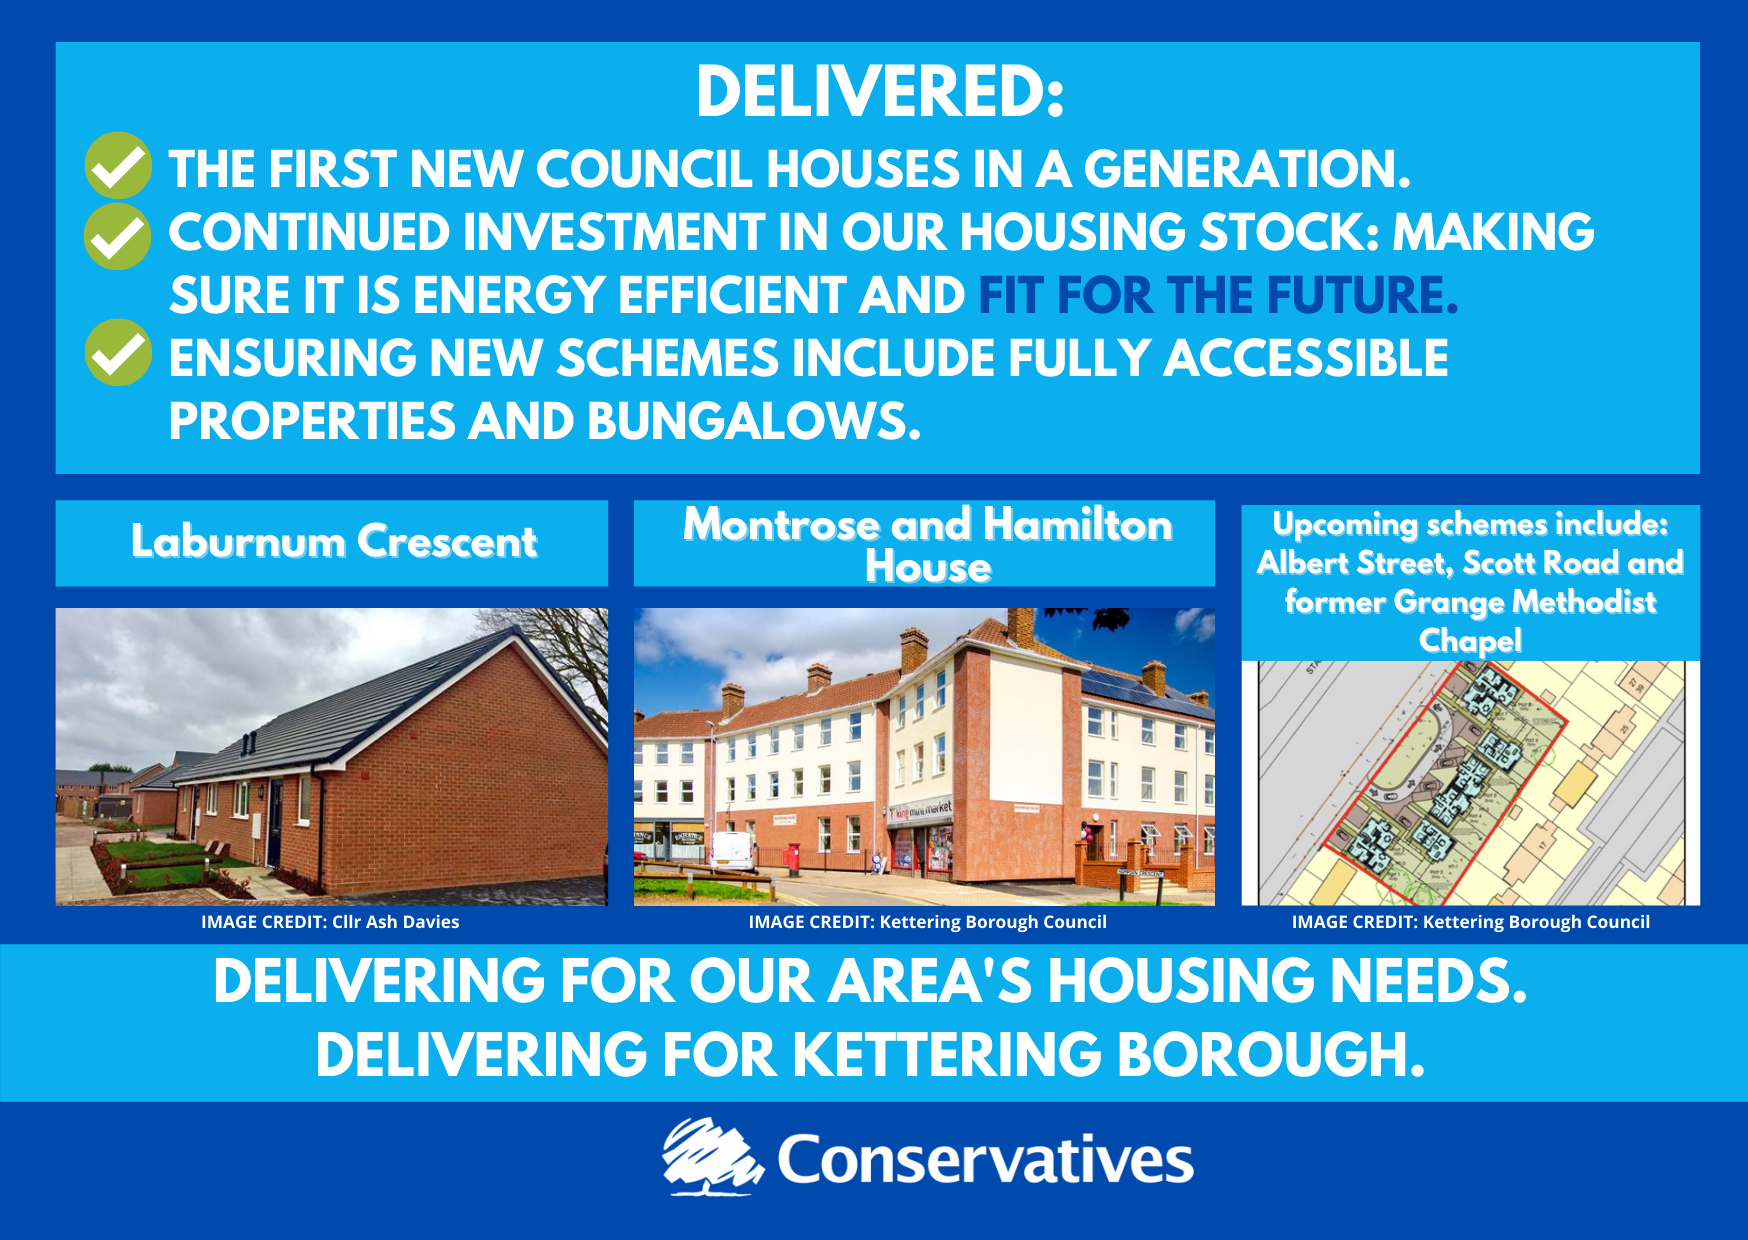 Kettering Borough Council Conservatives administration delivers new council houses